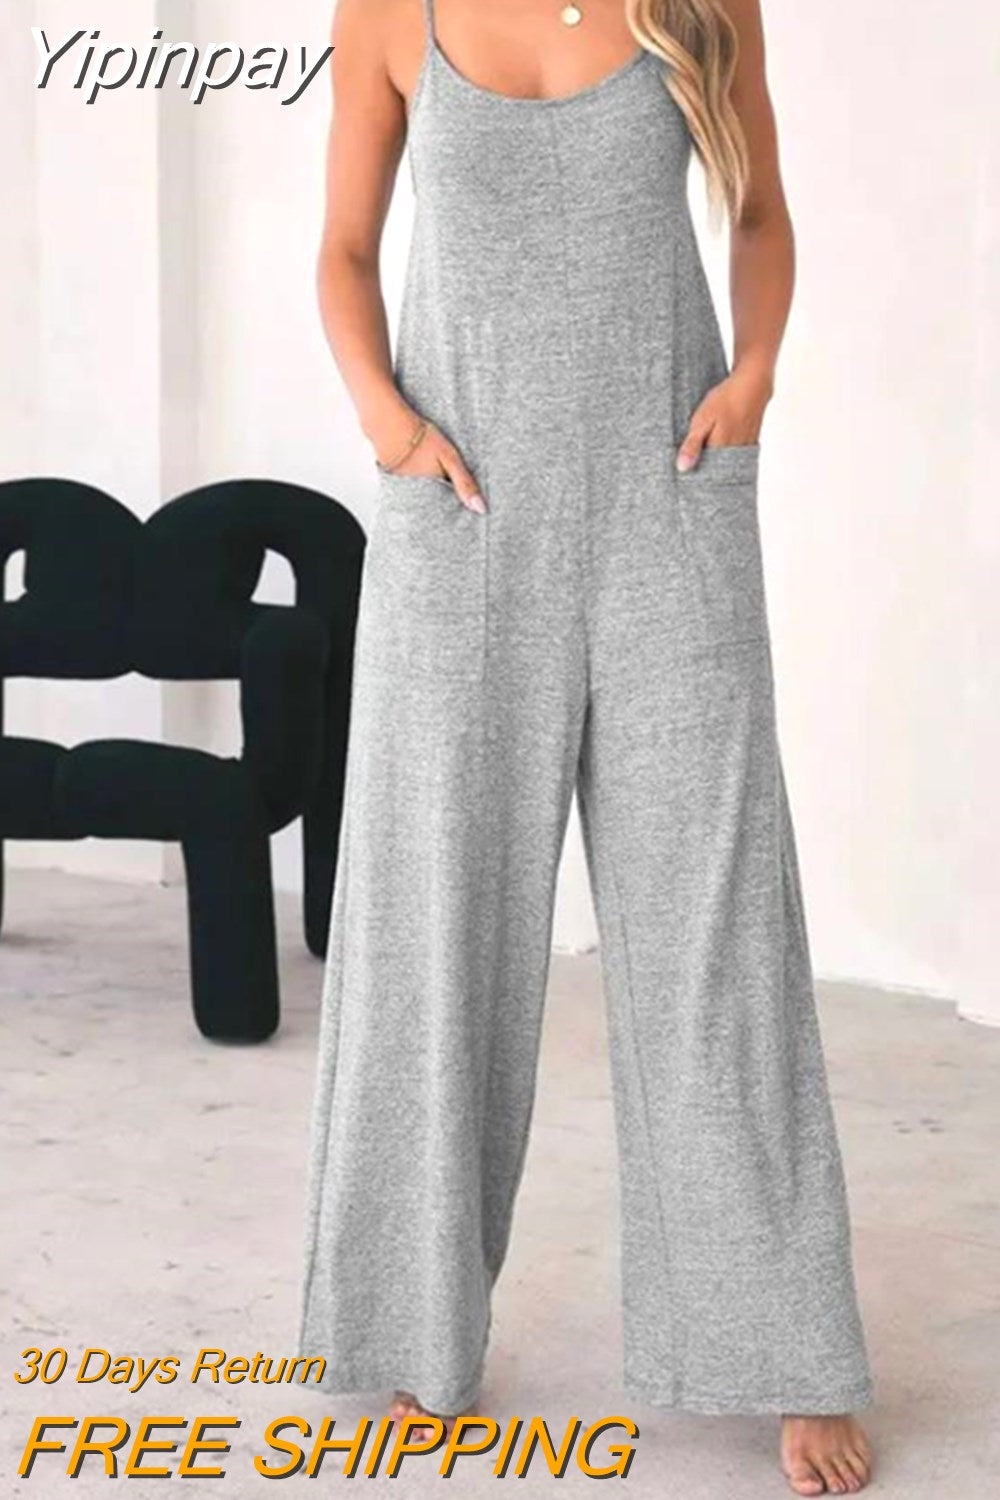 Yipinpay Design Spaghetti Strap Jumpsuit for Women 2023 Elegant Casual Long Pants Rompers Female Fashion Outfits